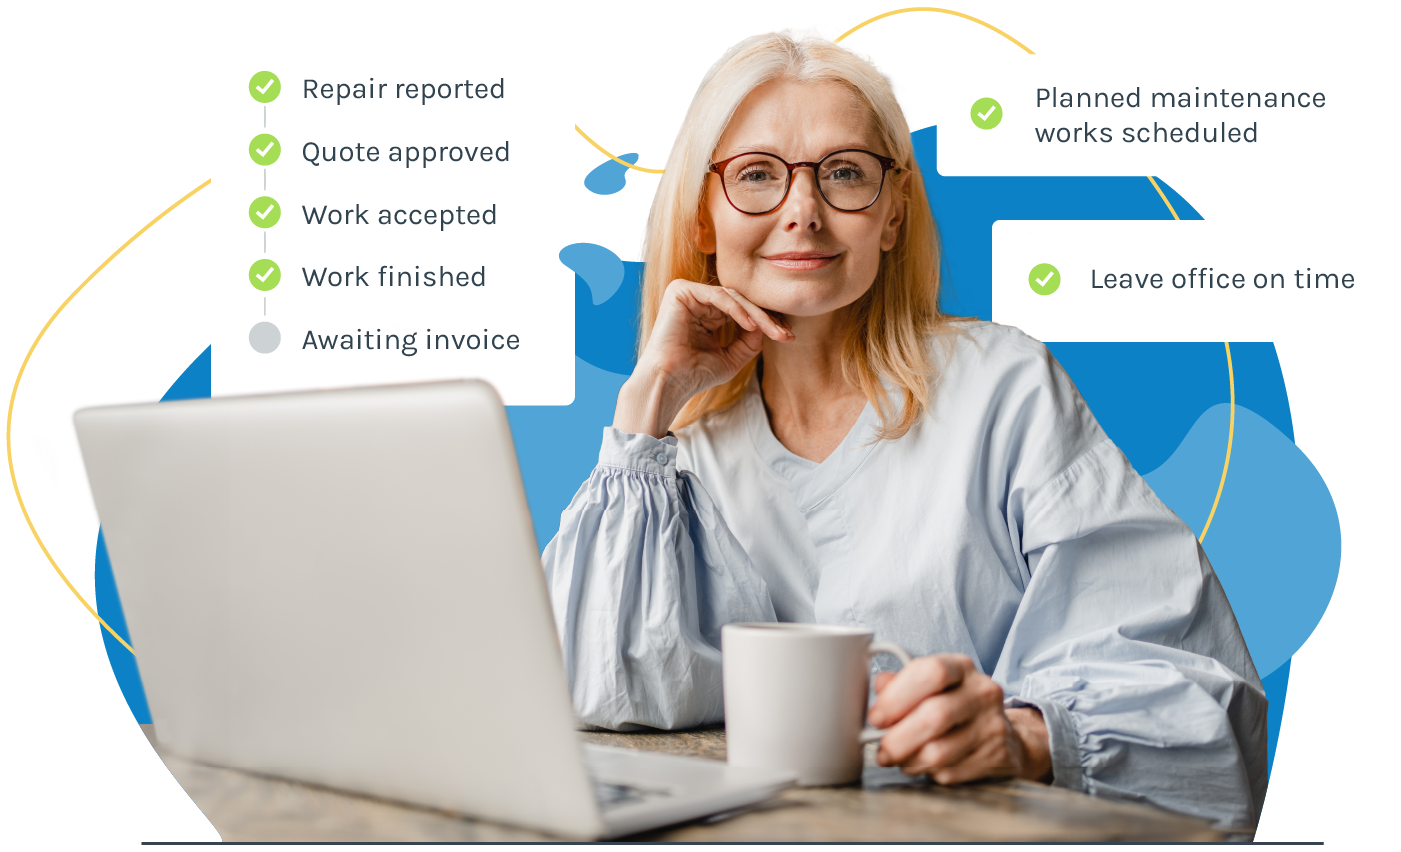 A relaxed property manager with checkbox illustrations of work completed via Fixflo's software including planned maintenance